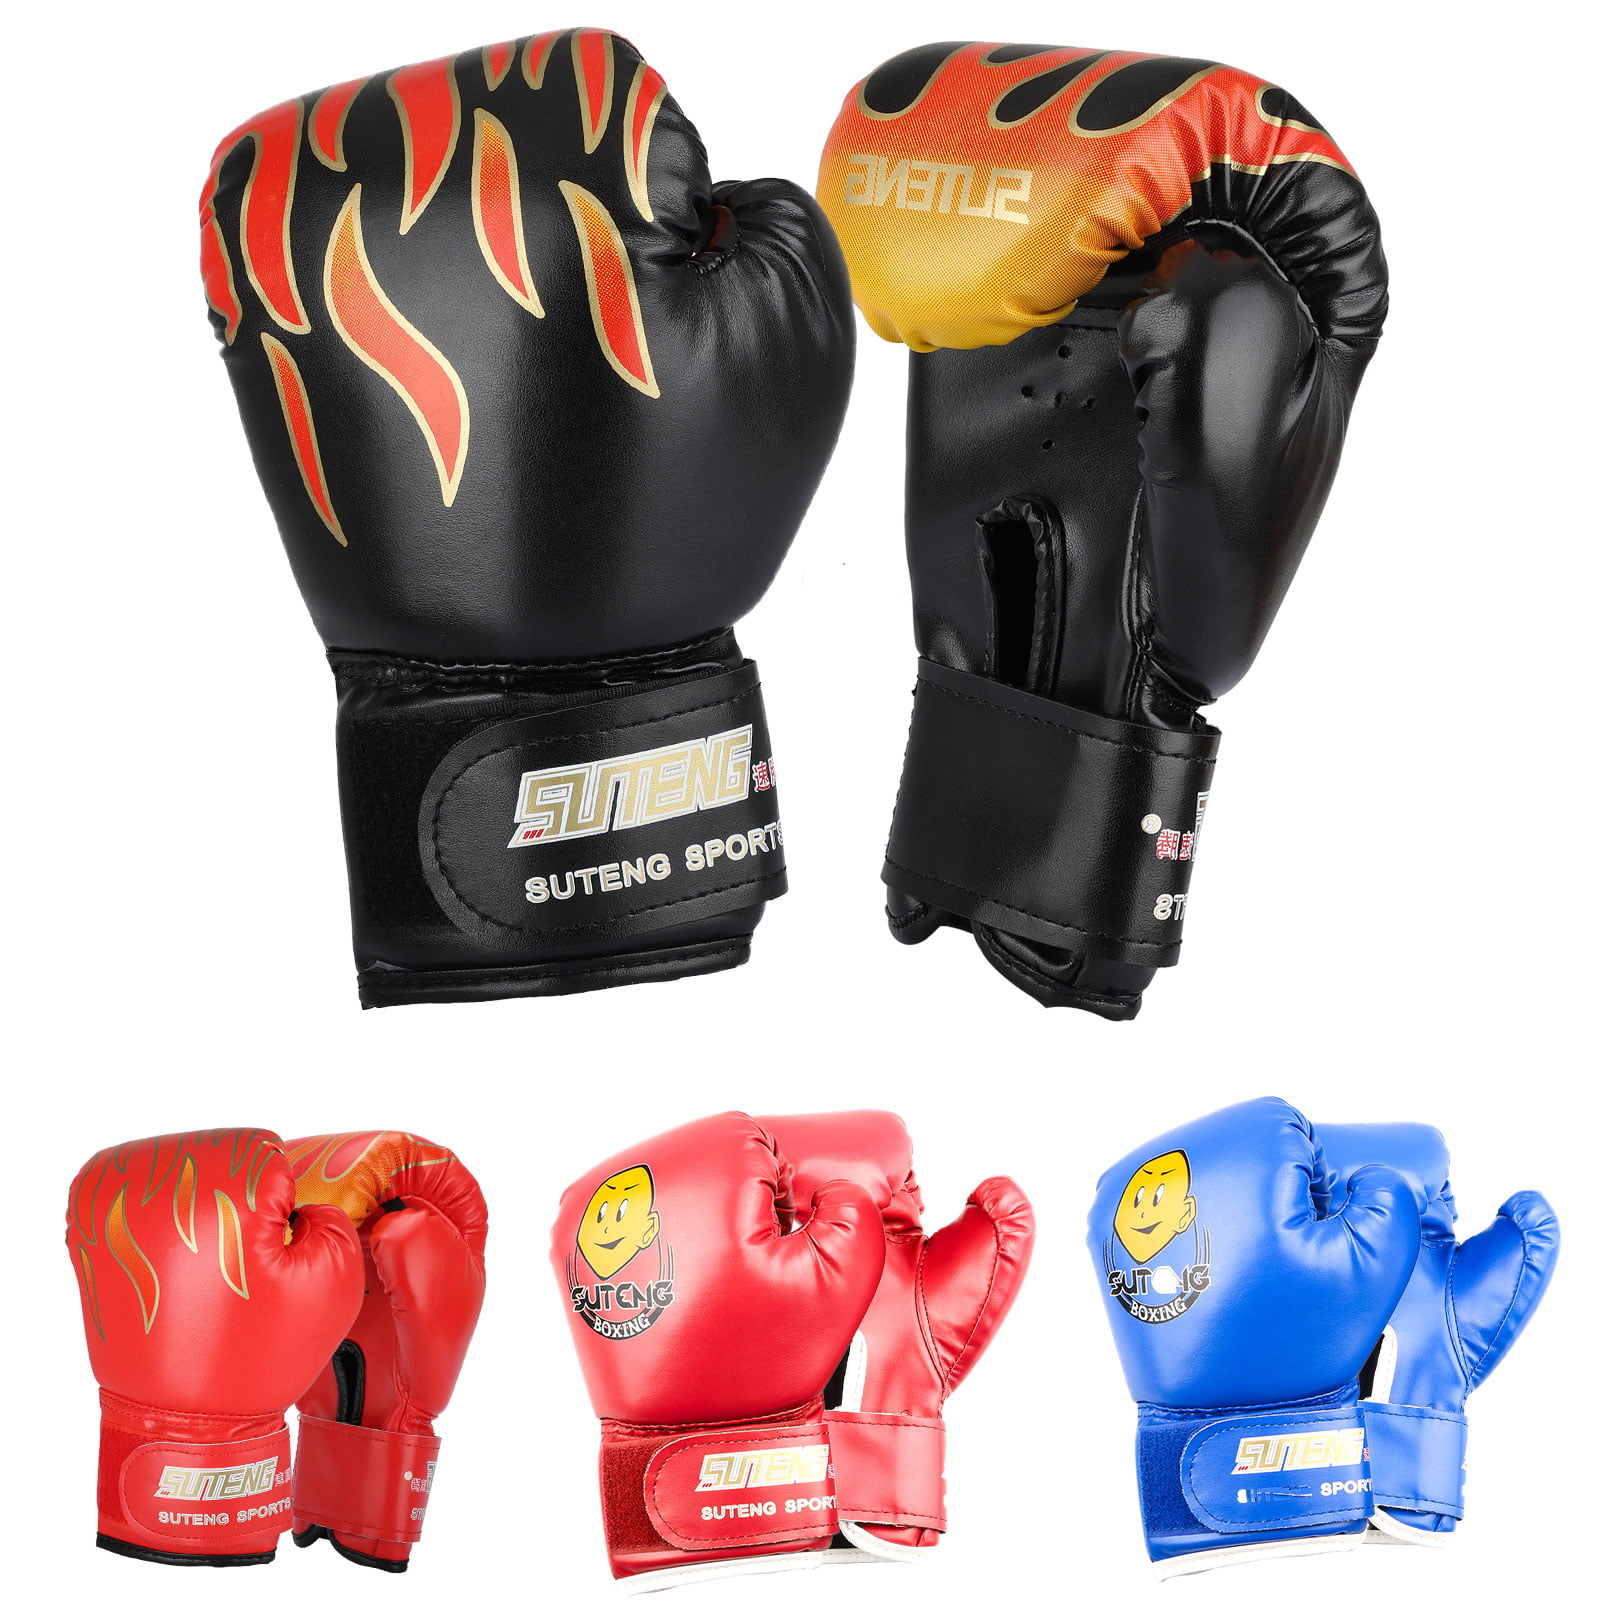 MMA UFC Fighting Leather Boxing Gloves Muay Thai Training Sparring Gloves Black 